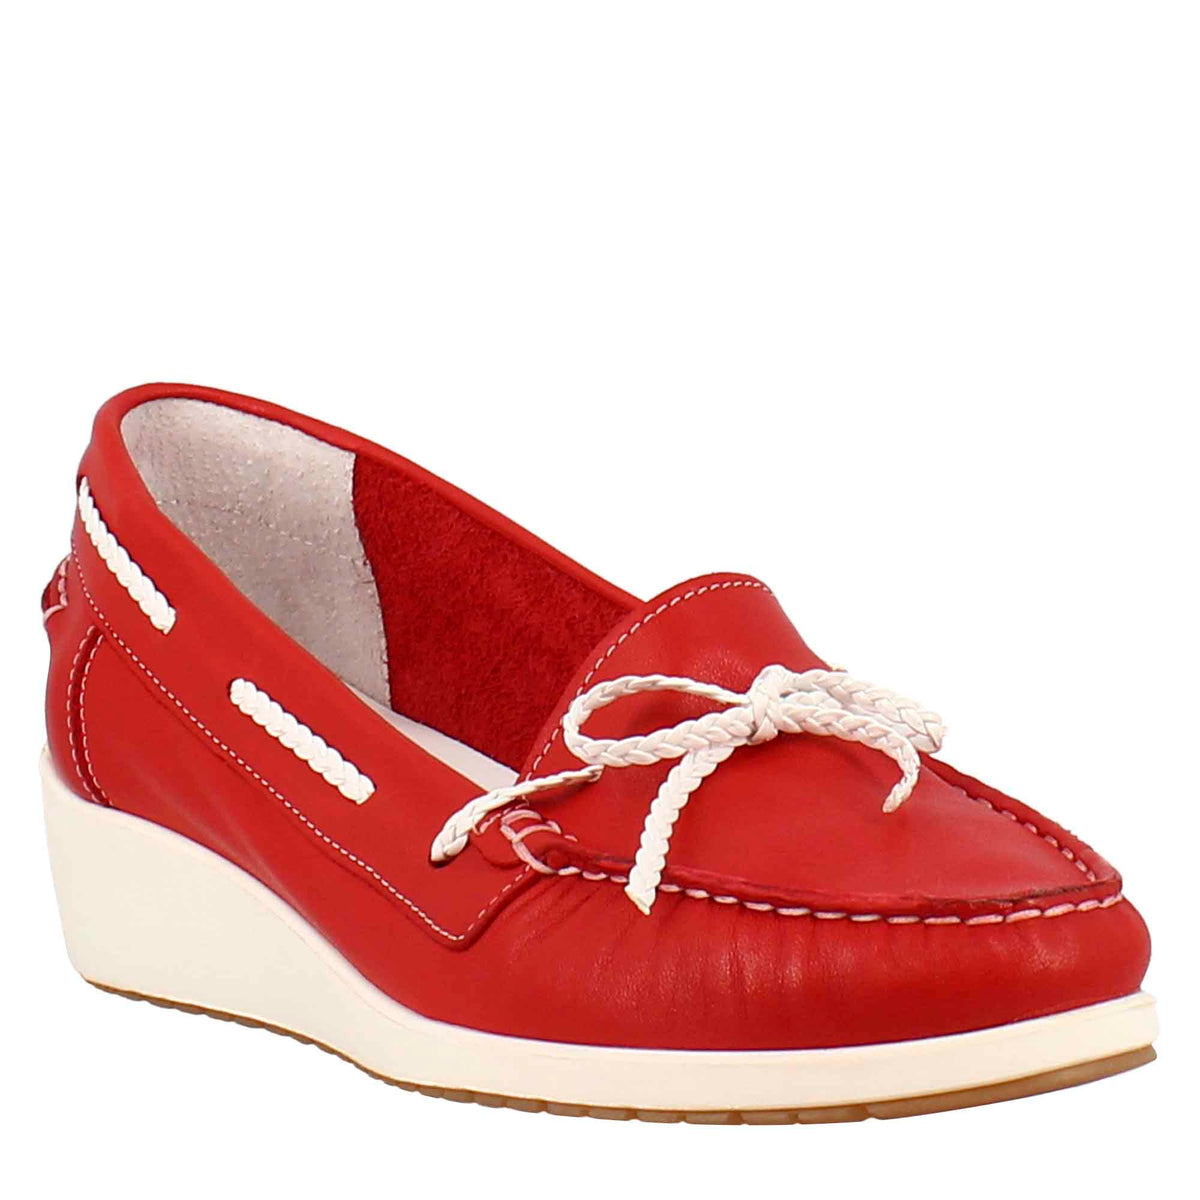 Women's handmade wedges loafers in red leather